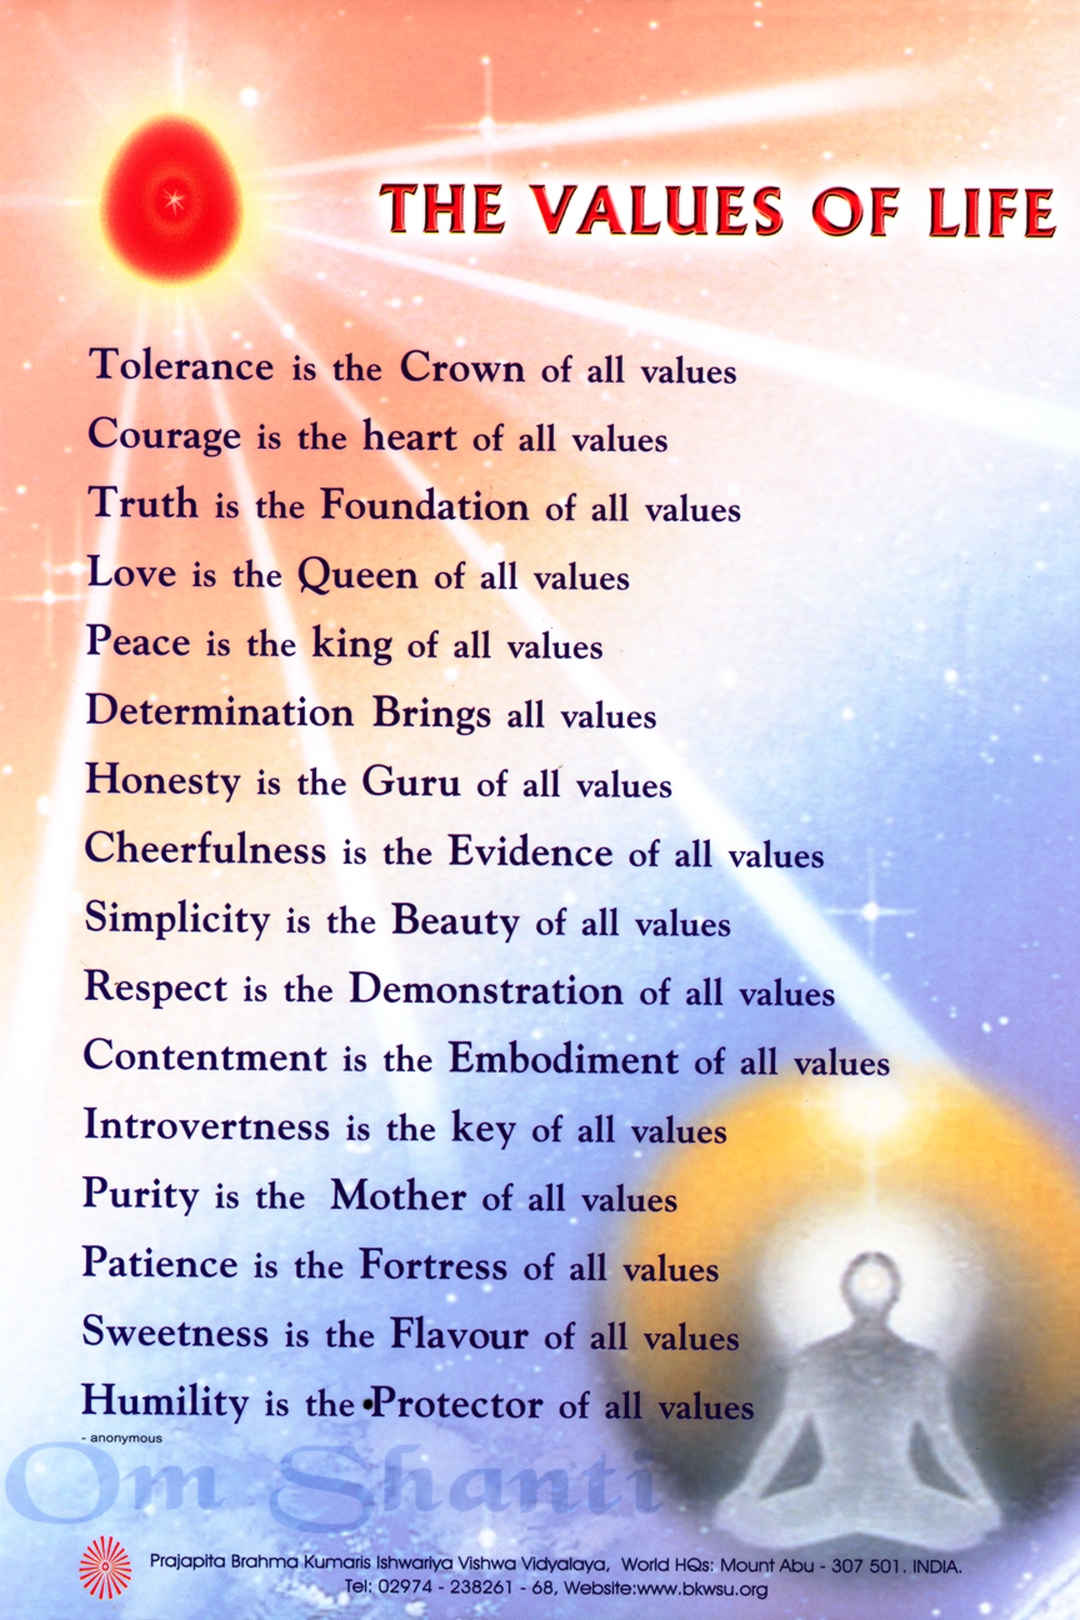 The values of life